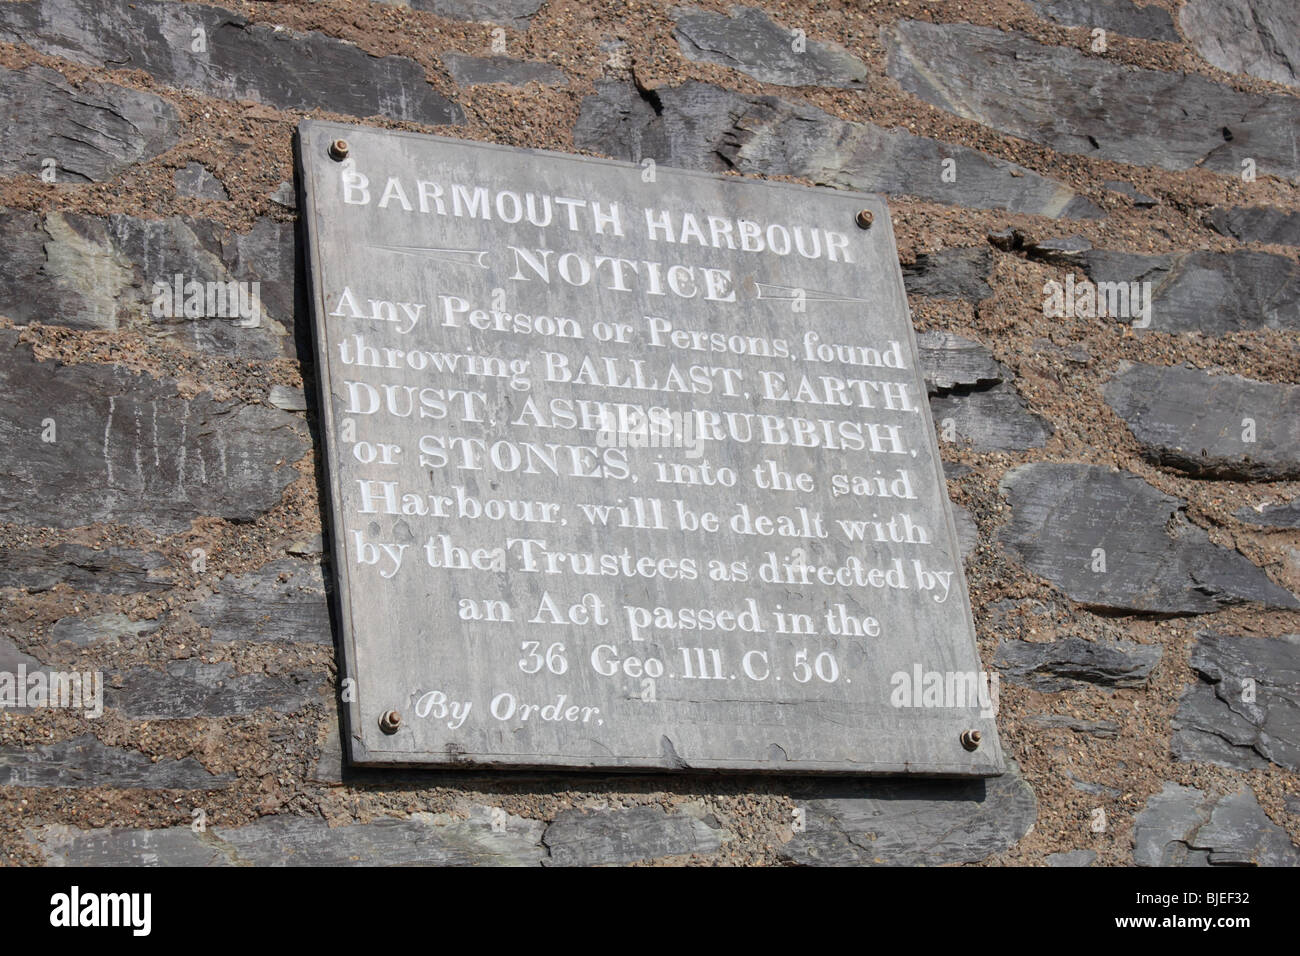 Inscribed slate sign on the wall of the Harbour Master's office in Barmouth Harbour prohibiting dumping into the harbour Stock Photo